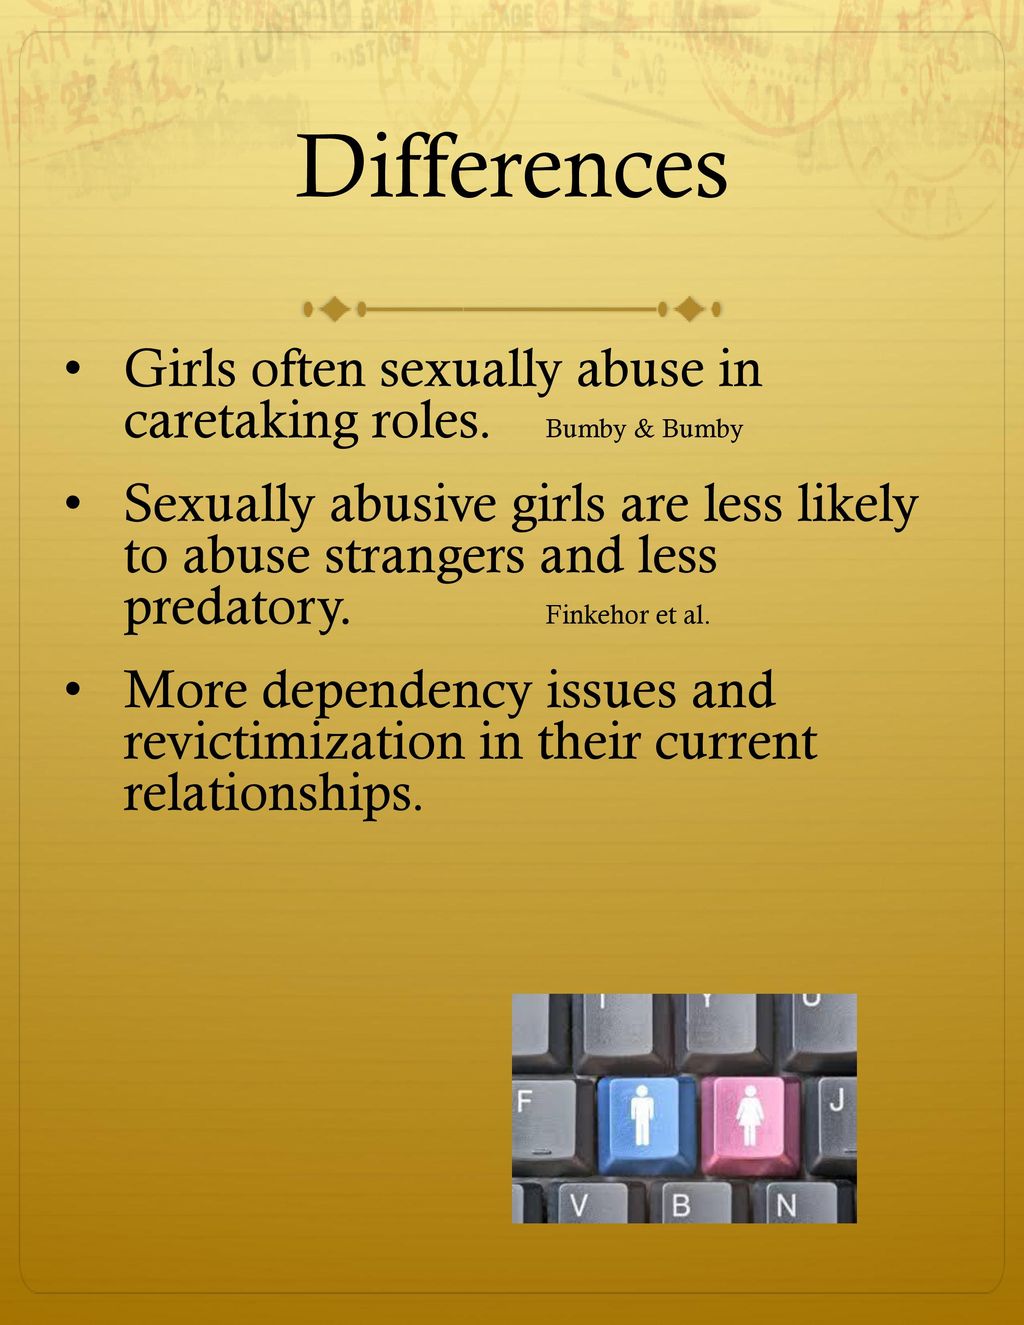 6/9/2018 Differences. Girls often sexually abuse in caretaking roles. Bumby & Bumby.